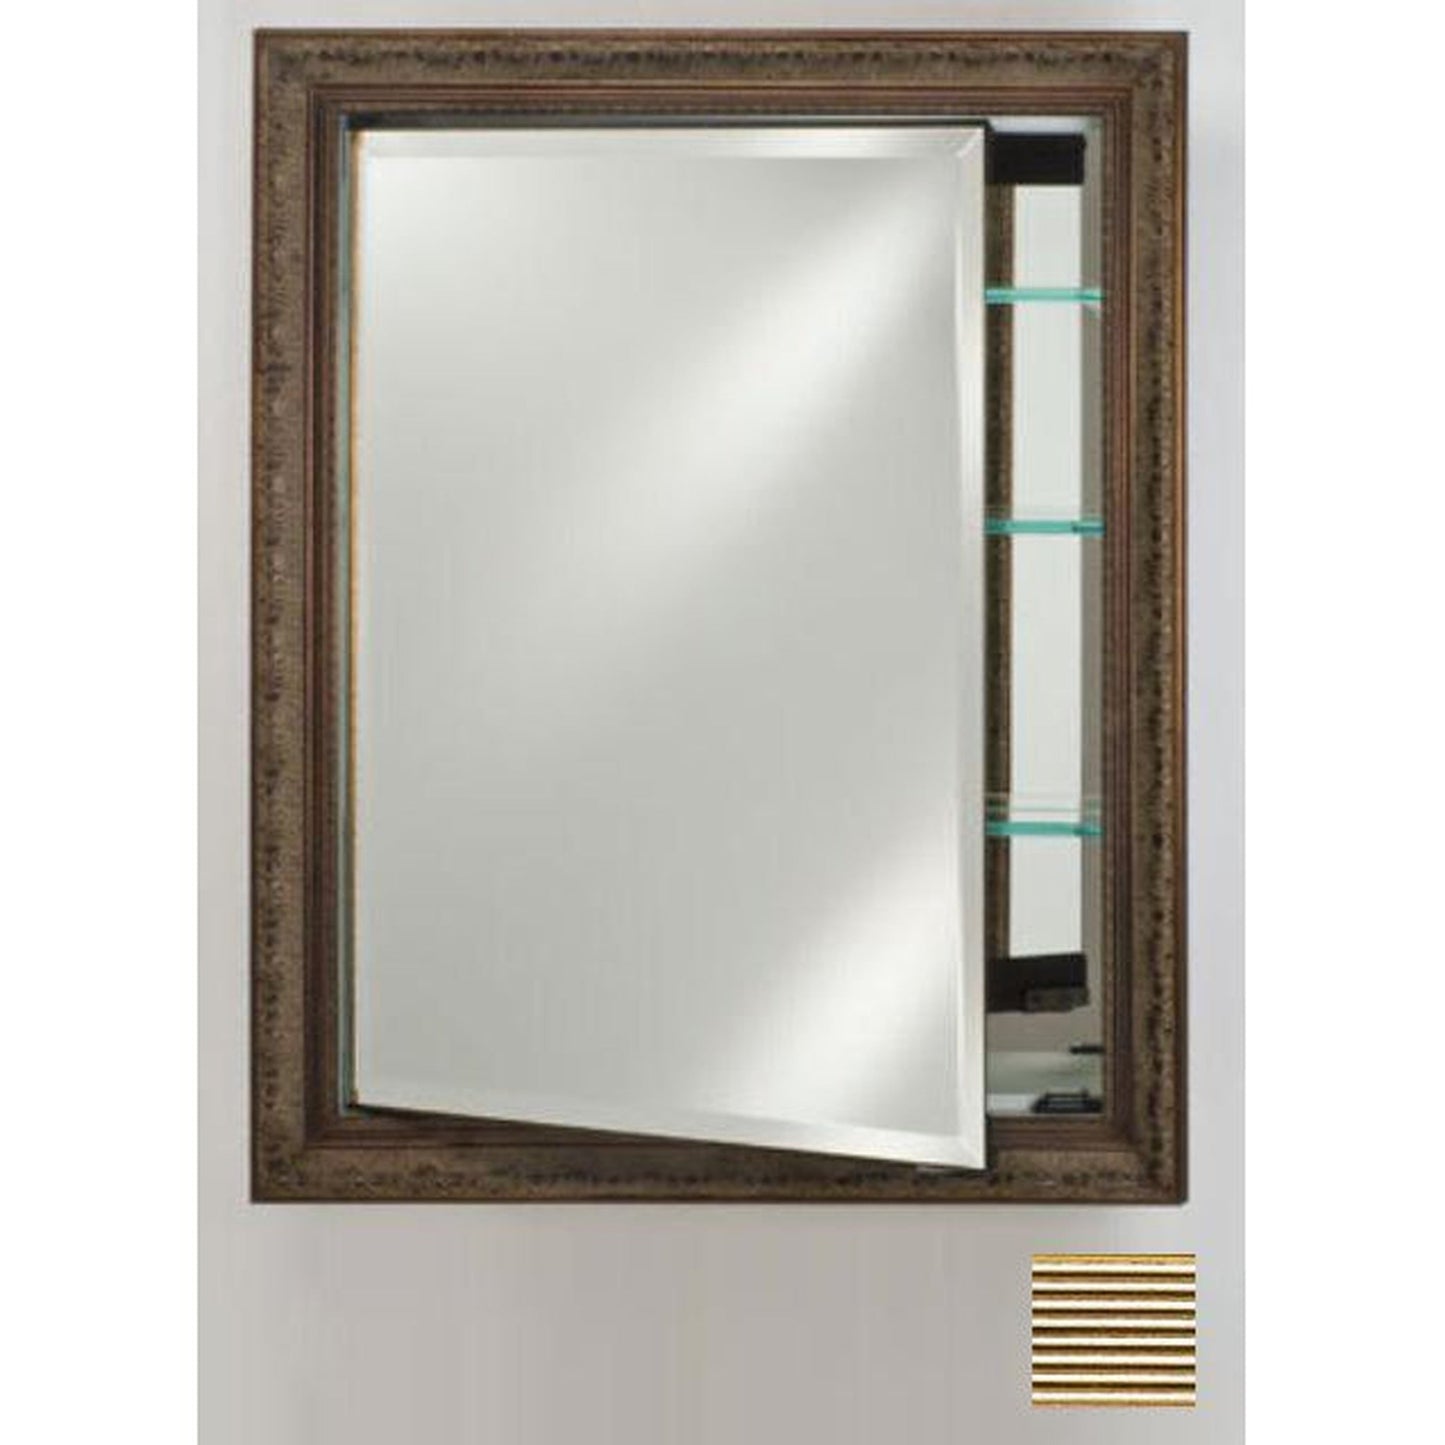 Afina Signature 24" x 36" Meridian Antique Gold With Antique Silver Caps Recessed Reversible Hinged Single Door Medicine Cabinet With Beveled Edge Mirror